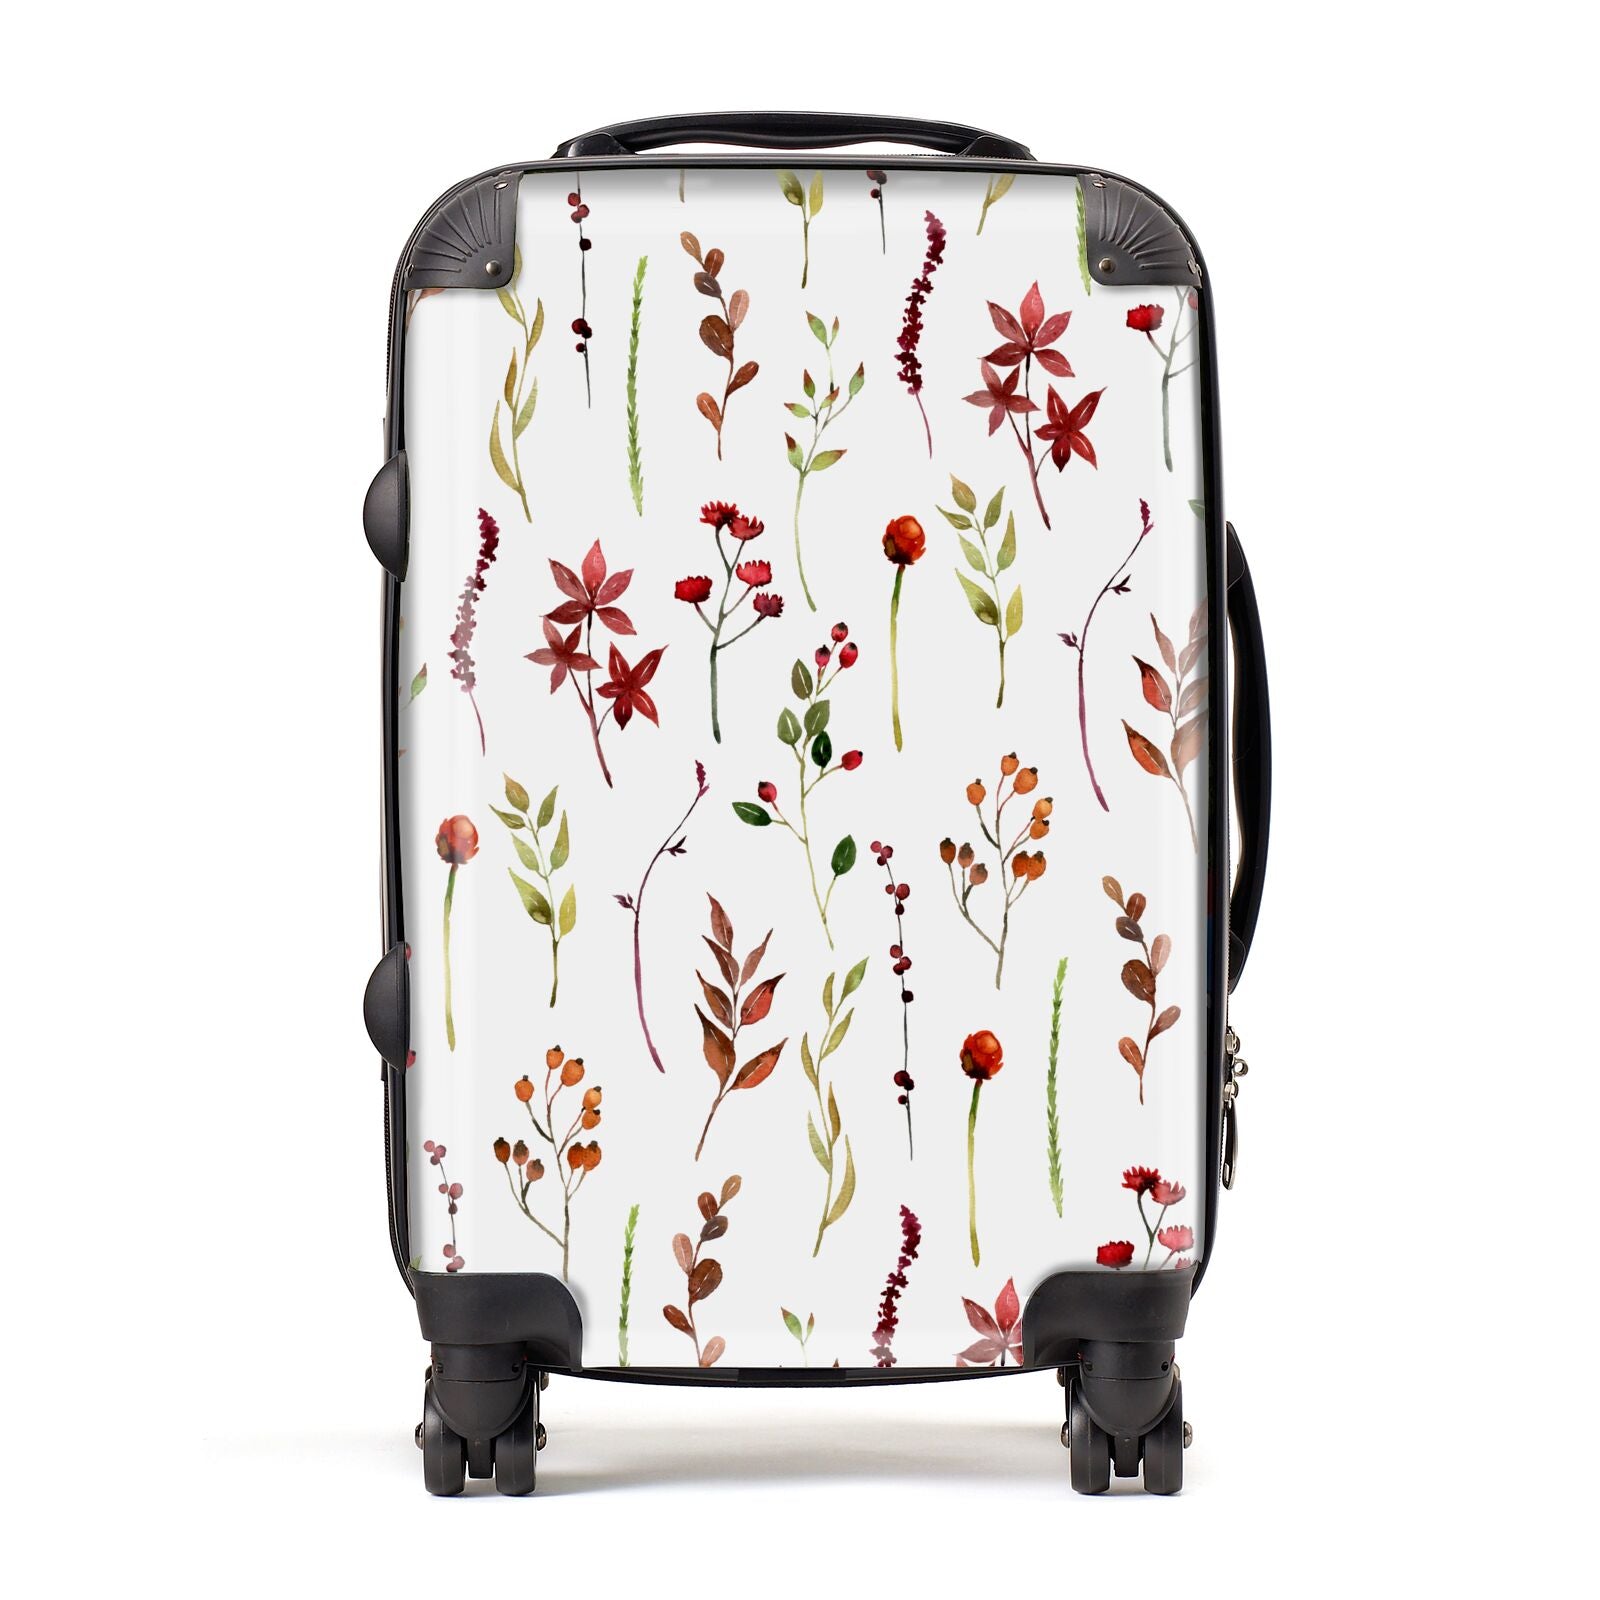 Watercolour Flowers and Foliage Suitcase